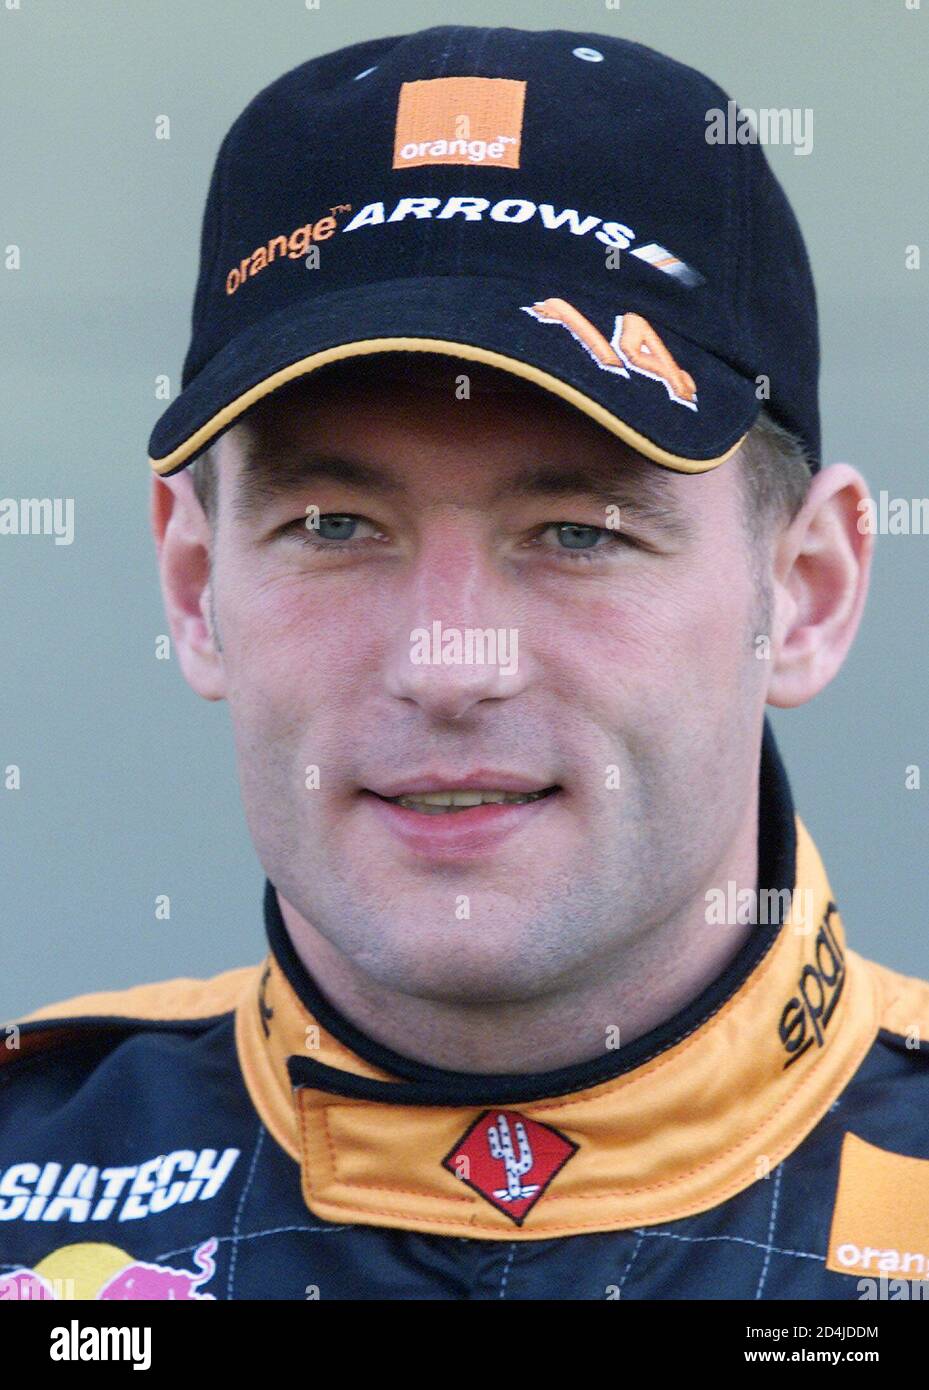 Arrows Formula One driver Jos Verstappen of the Netherlands at the Australian  Grand Prix in Melbourne